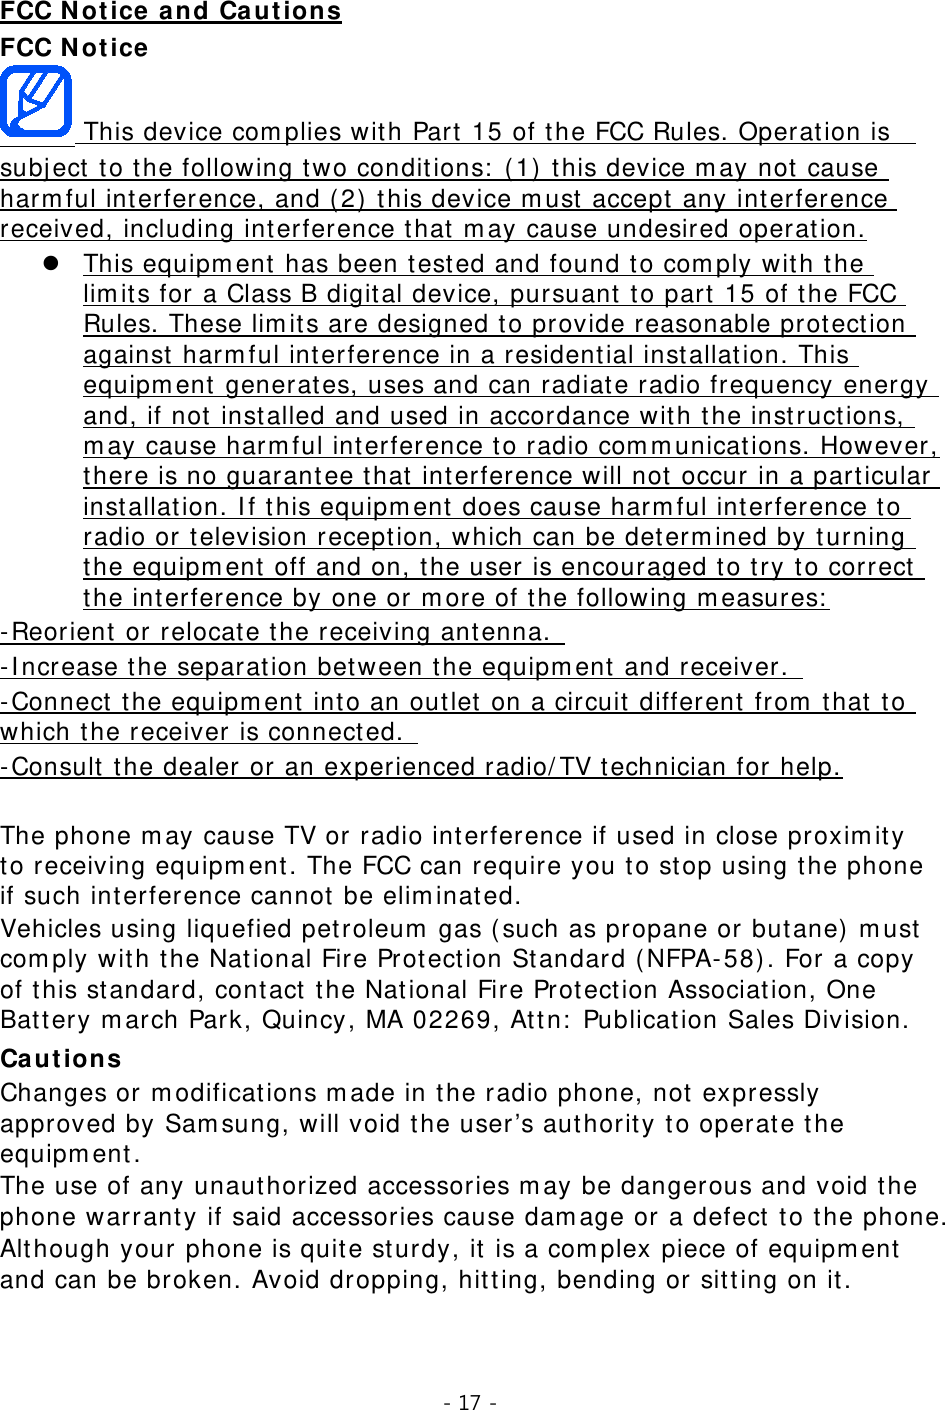 - 17 -  FCC Notice FCC Notice and Cautions   This device complies with Part 15 of the FCC Rules. Operation is  subject to the following two conditions: (1) this device may not cause harmful interference, and (2) this device must accept any interference received, including interference that may cause undesired operation. This equipment has been tested and found to comply with the limits for a Class B digital device, pursuant to part 15 of the FCC Rules. These limits are designed to provide reasonable protection against harmful interference in a residential installation. This equipment generates, uses and can radiate radio frequency energy and, if not installed and used in accordance with the instructions, may cause harmful interference to radio communications. However, there is no guarantee that interference will not occur in a particular installation. If this equipment does cause harmful interference to radio or television reception, which can be determined by turning the equipment off and on, the user is encouraged to try to correct the interference by one or more of the following measures: -Reorient or relocate the receiving antenna.  -Increase the separation between the equipment and receiver.  -Connect the equipment into an outlet on a circuit different from that to which the receiver is connected.   -Consult the dealer or an experienced radio/TV technician for help. The phone may cause TV or radio interference if used in close proximity to receiving equipment. The FCC can require you to stop using the phone if such interference cannot be eliminated. Vehicles using liquefied petroleum gas (such as propane or butane) must comply with the National Fire Protection Standard (NFPA-58). For a copy of this standard, contact the National Fire Protection Association, One Battery march Park, Quincy, MA 02269, Attn: Publication Sales Division. Cautions Changes or modifications made in the radio phone, not expressly approved by Samsung, will void the user’s authority to operate the equipment. The use of any unauthorized accessories may be dangerous and void the phone warranty if said accessories cause damage or a defect to the phone. Although your phone is quite sturdy, it is a complex piece of equipment and can be broken. Avoid dropping, hitting, bending or sitting on it.   